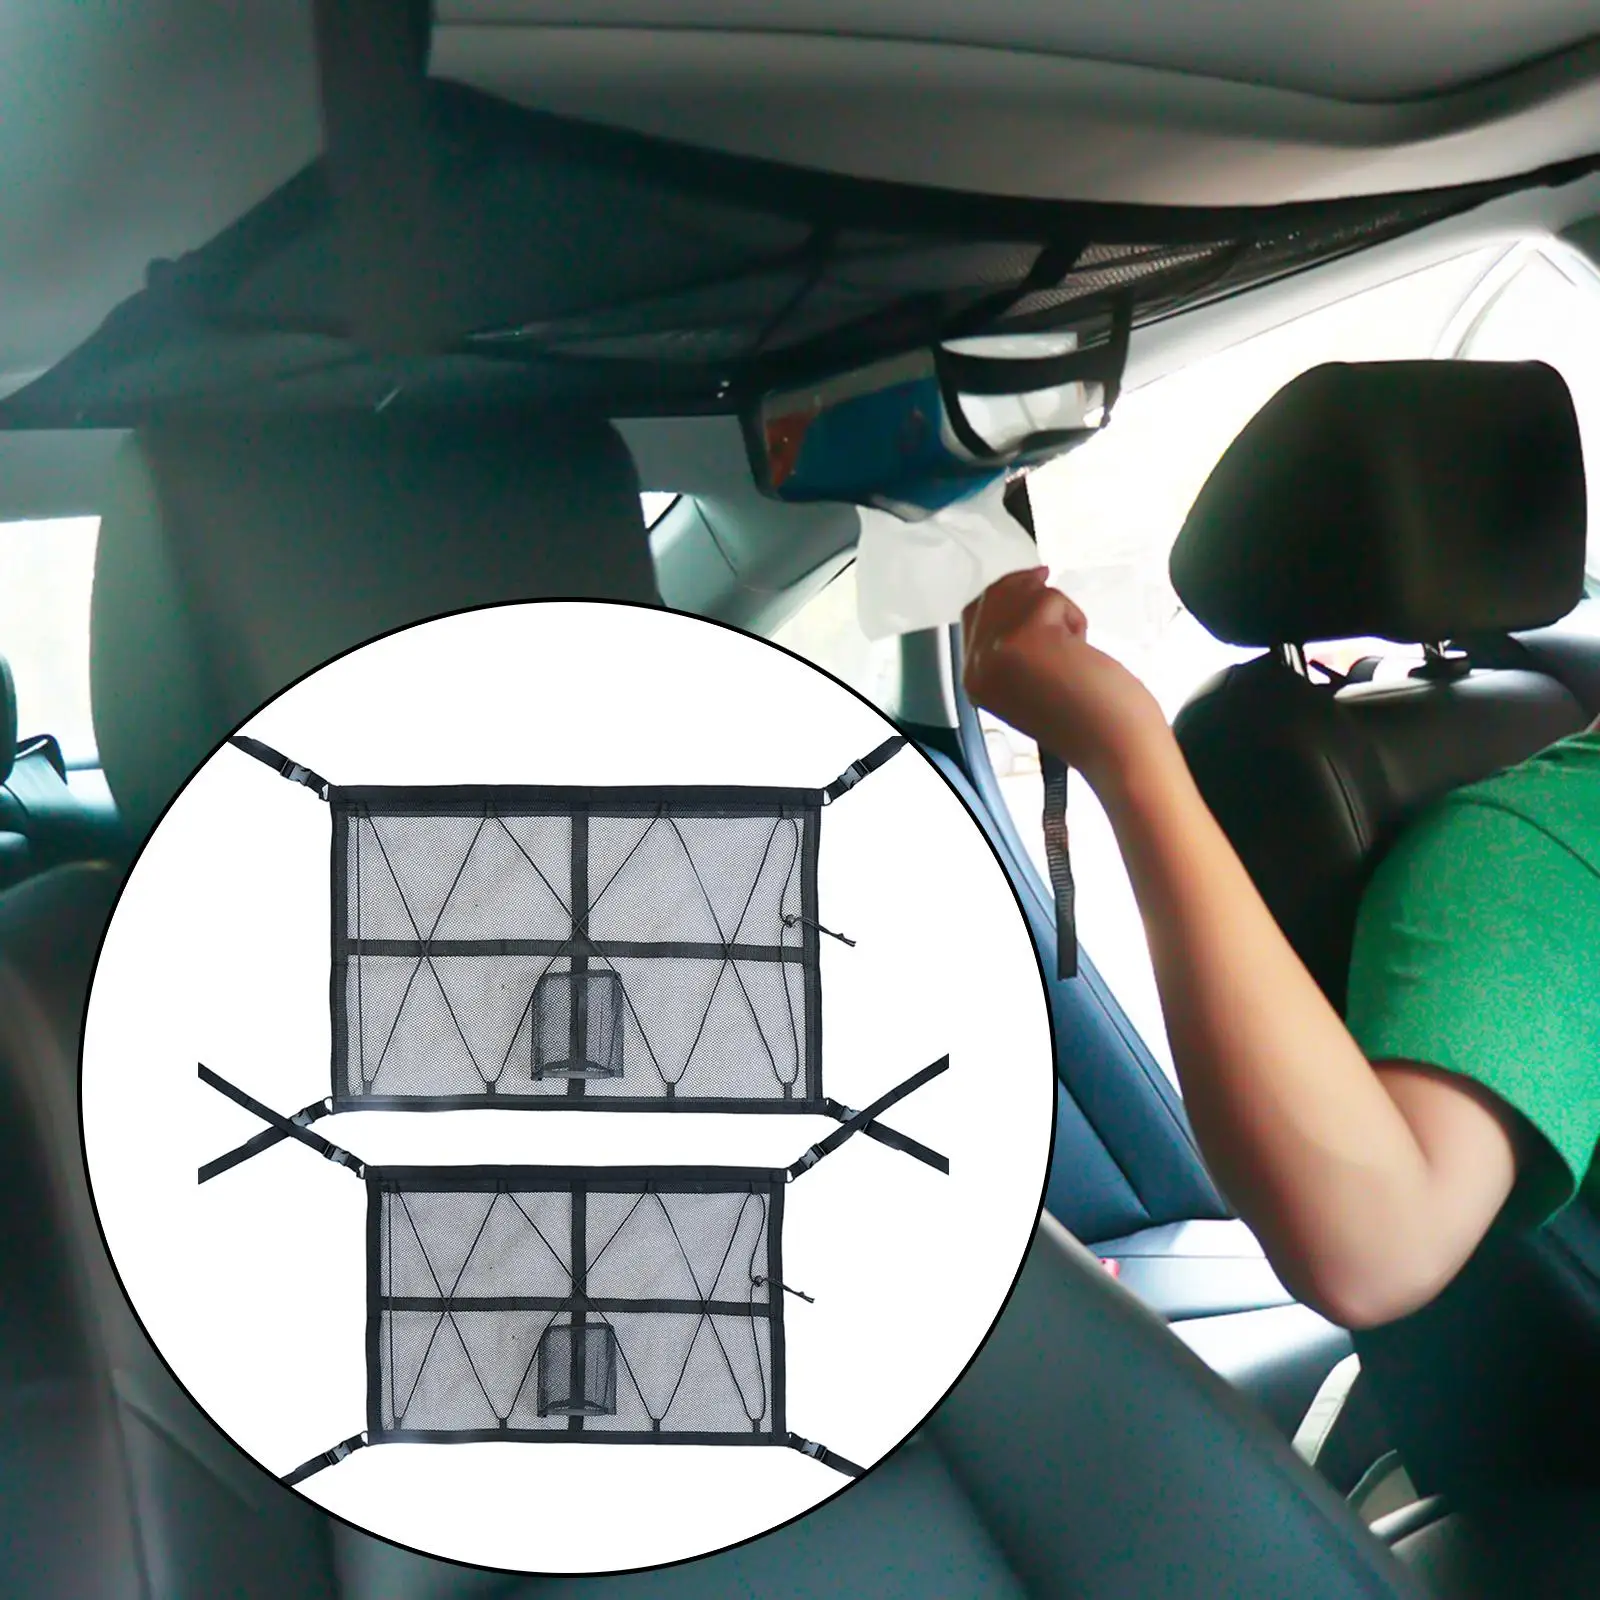 Car Ceiling Cargo Net Double Layer Interior with Zipper Car Tents Organizer for